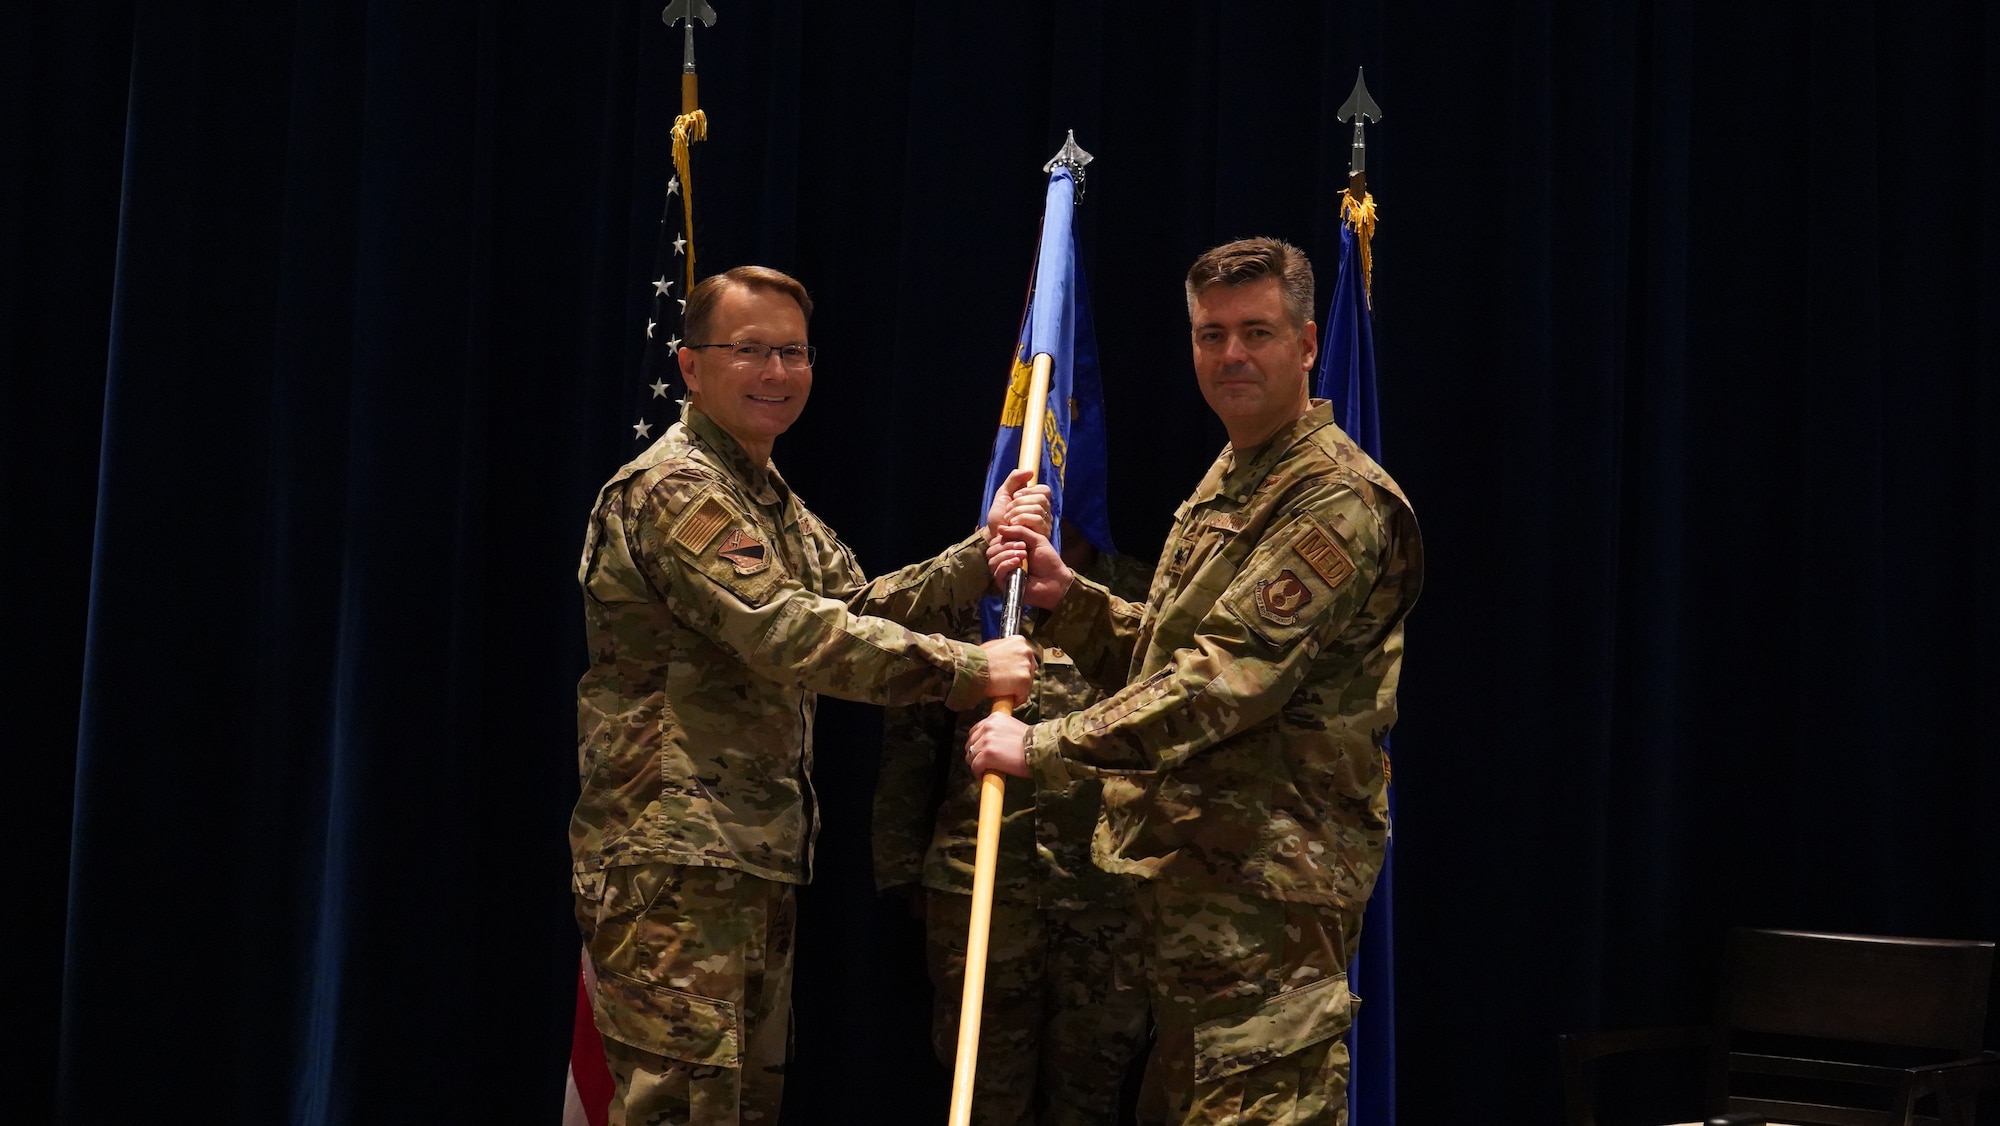 Harrell presents the 88th Surgical Operations Squadron guidon to Gavitt.